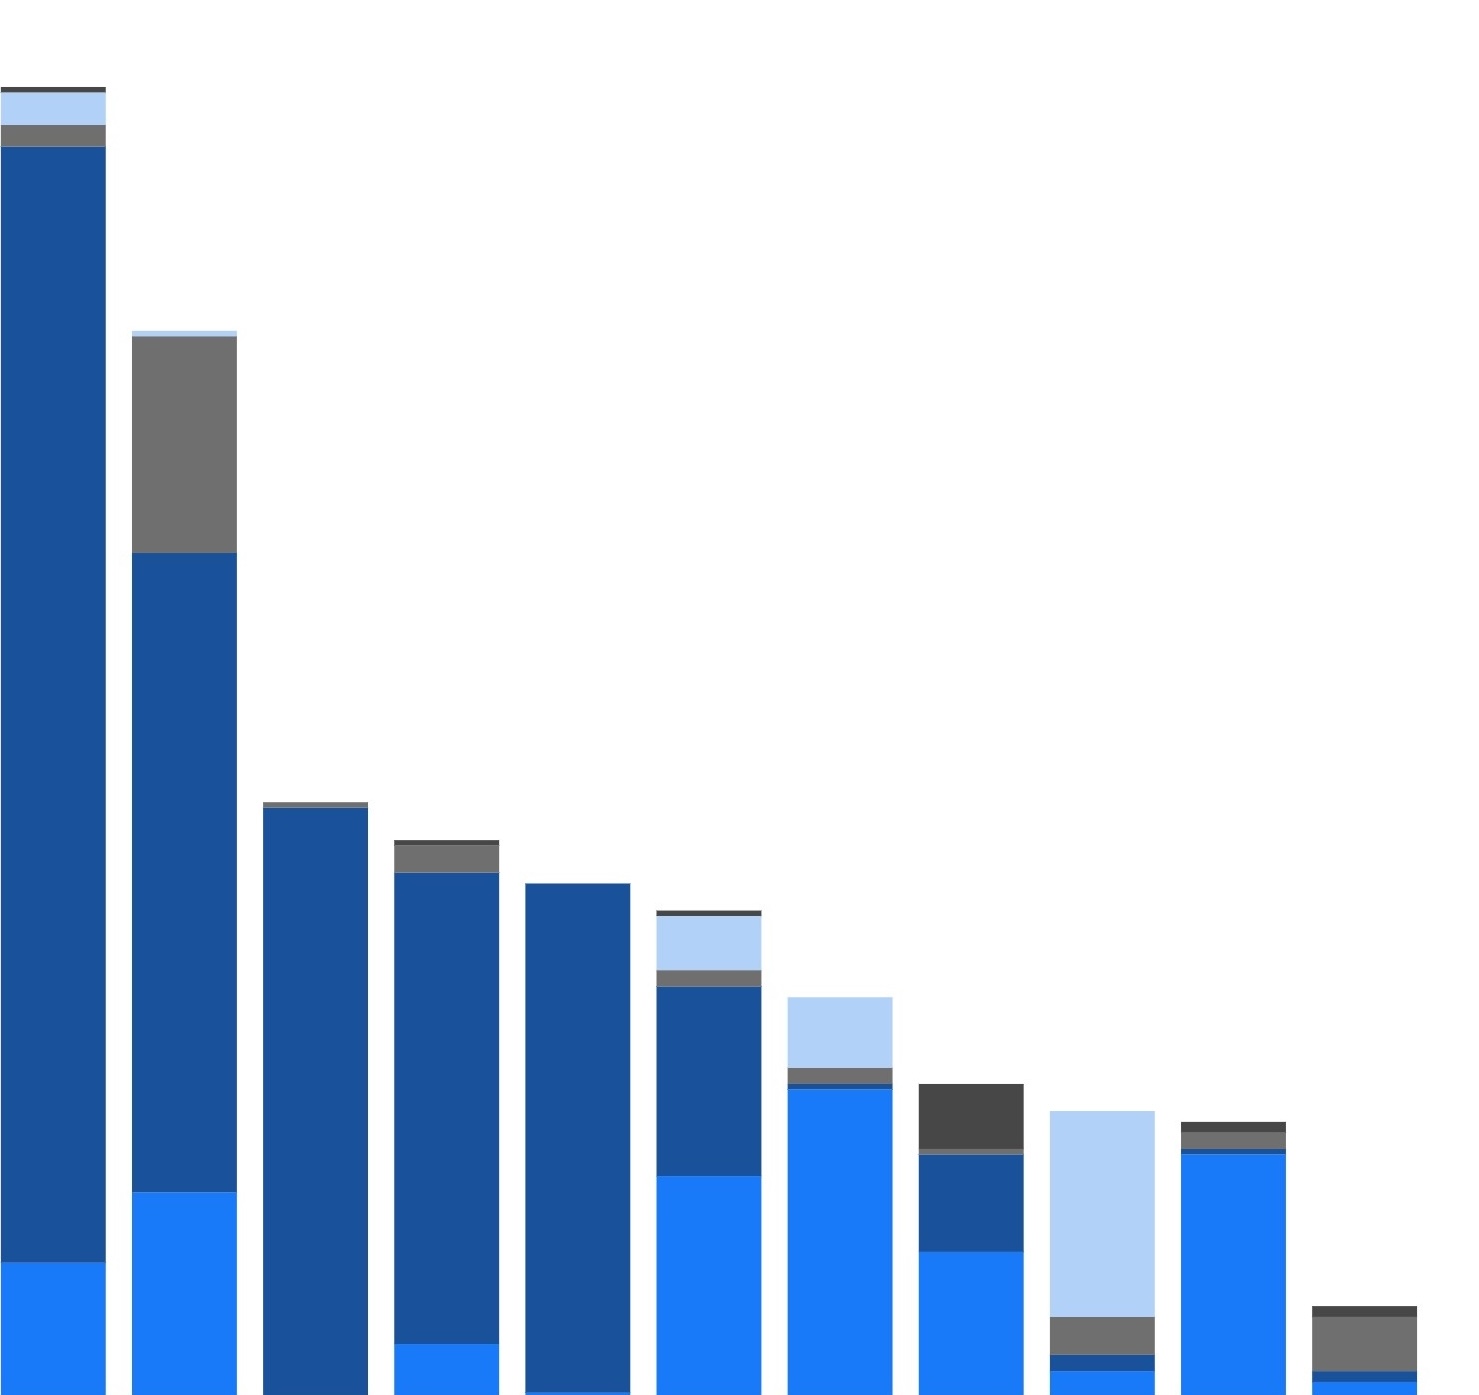 Stacked bar chart in blues and greys.